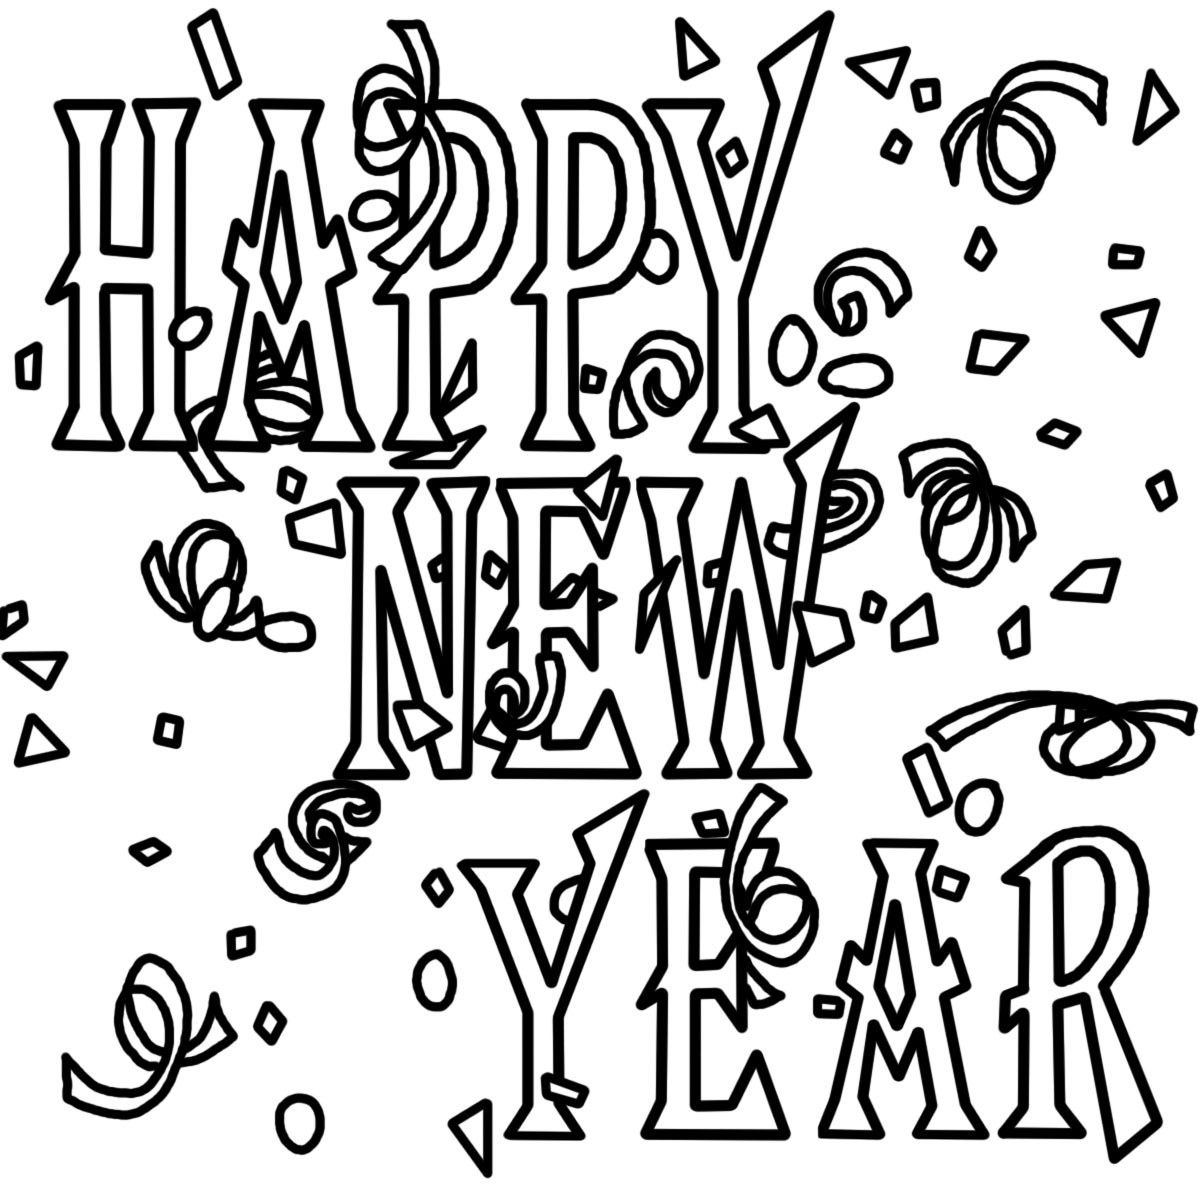 Printable New Year Coloring Pages
 Free Printable New Years Coloring Pages For Kids